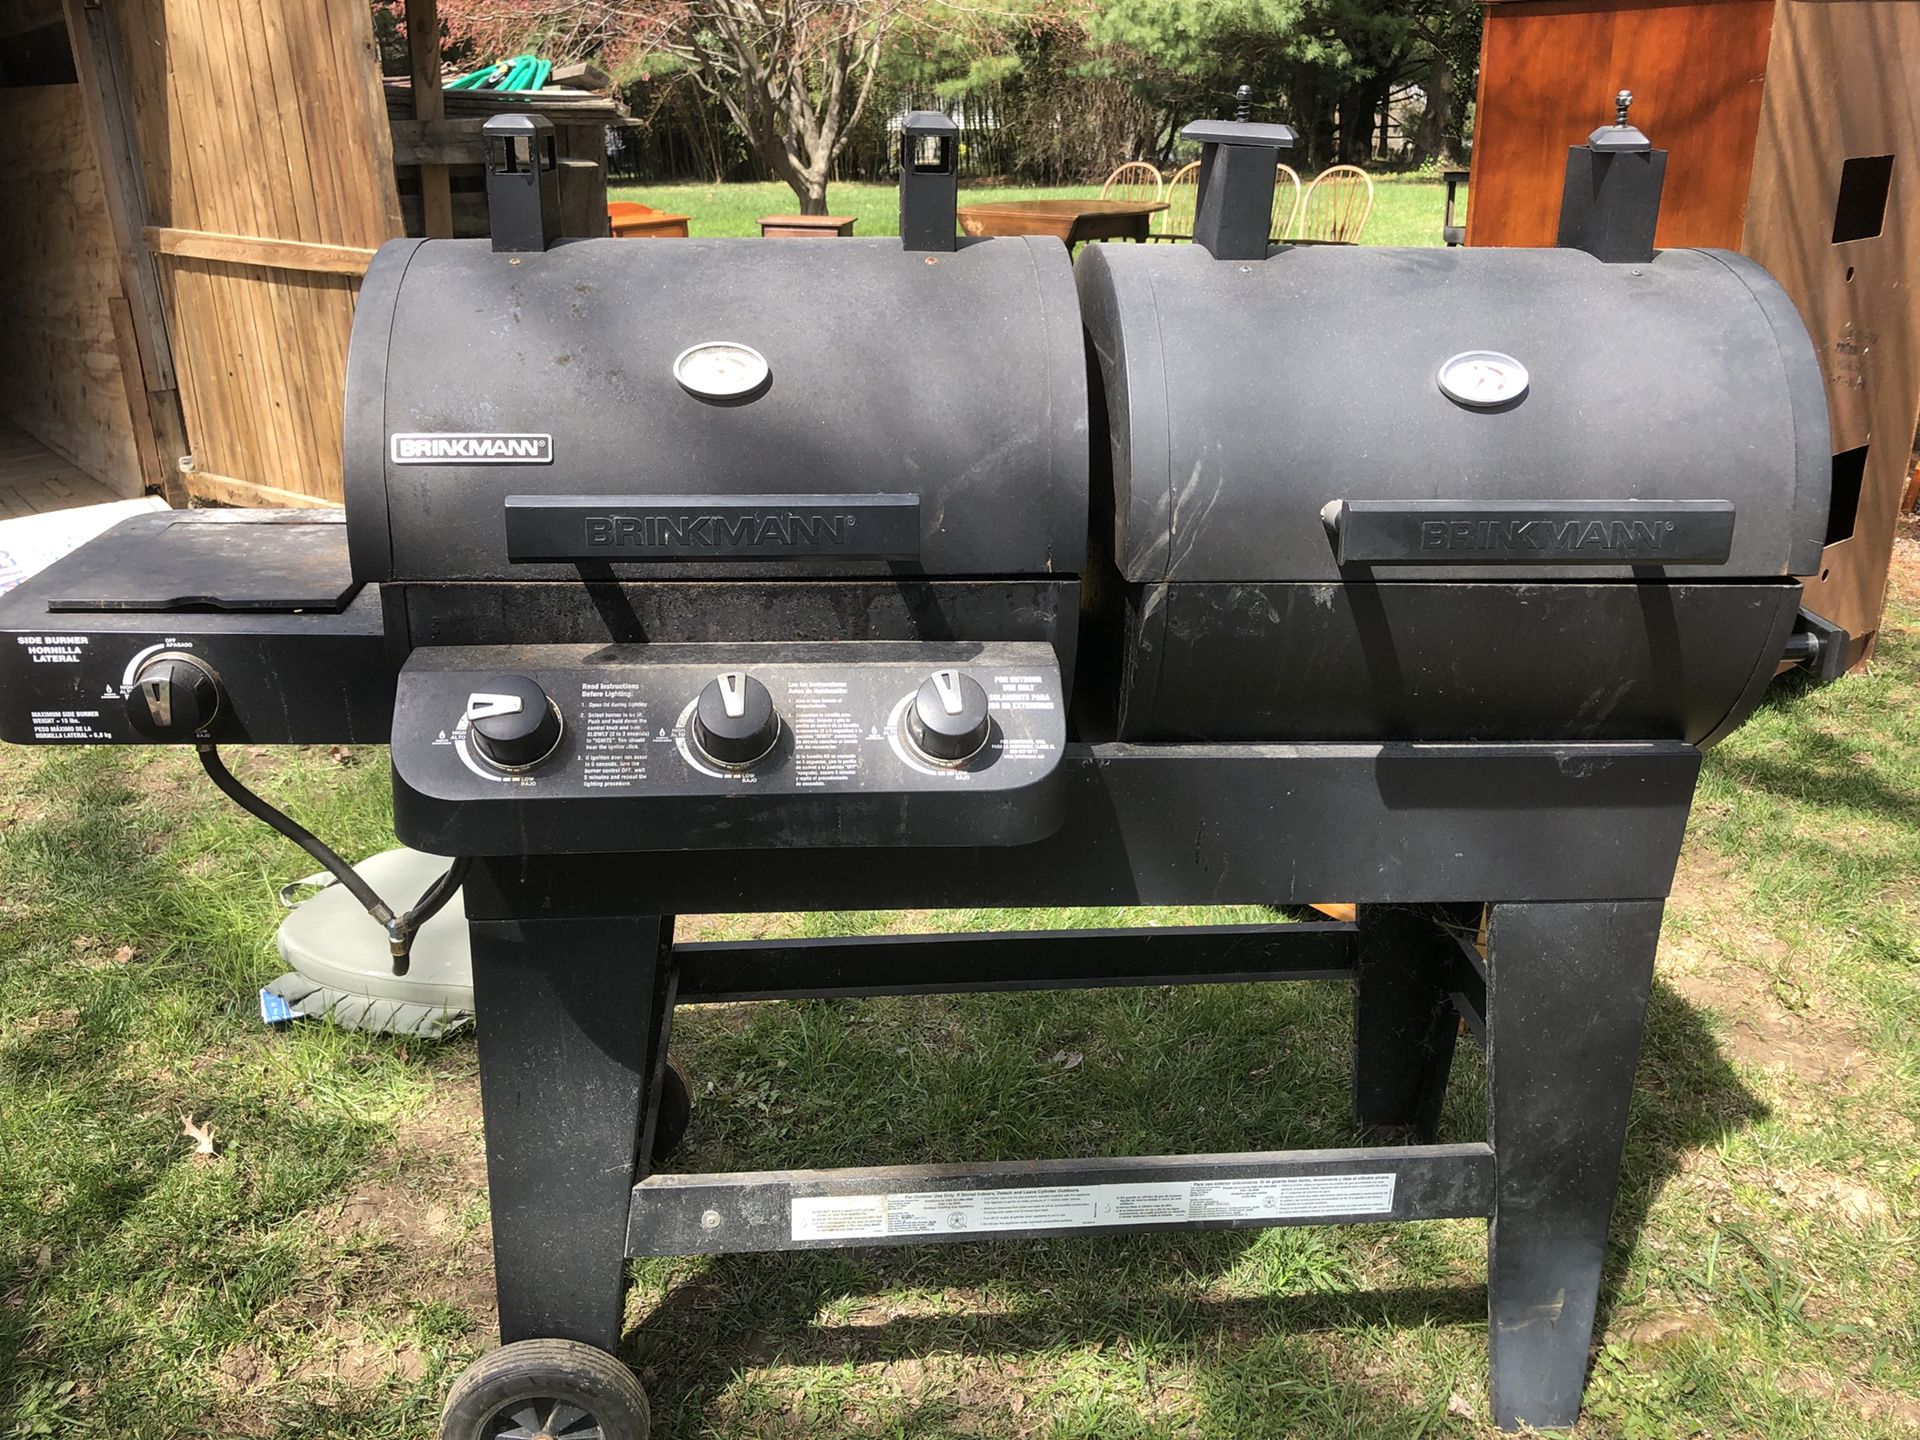 Gas/charcoal/smoker grill